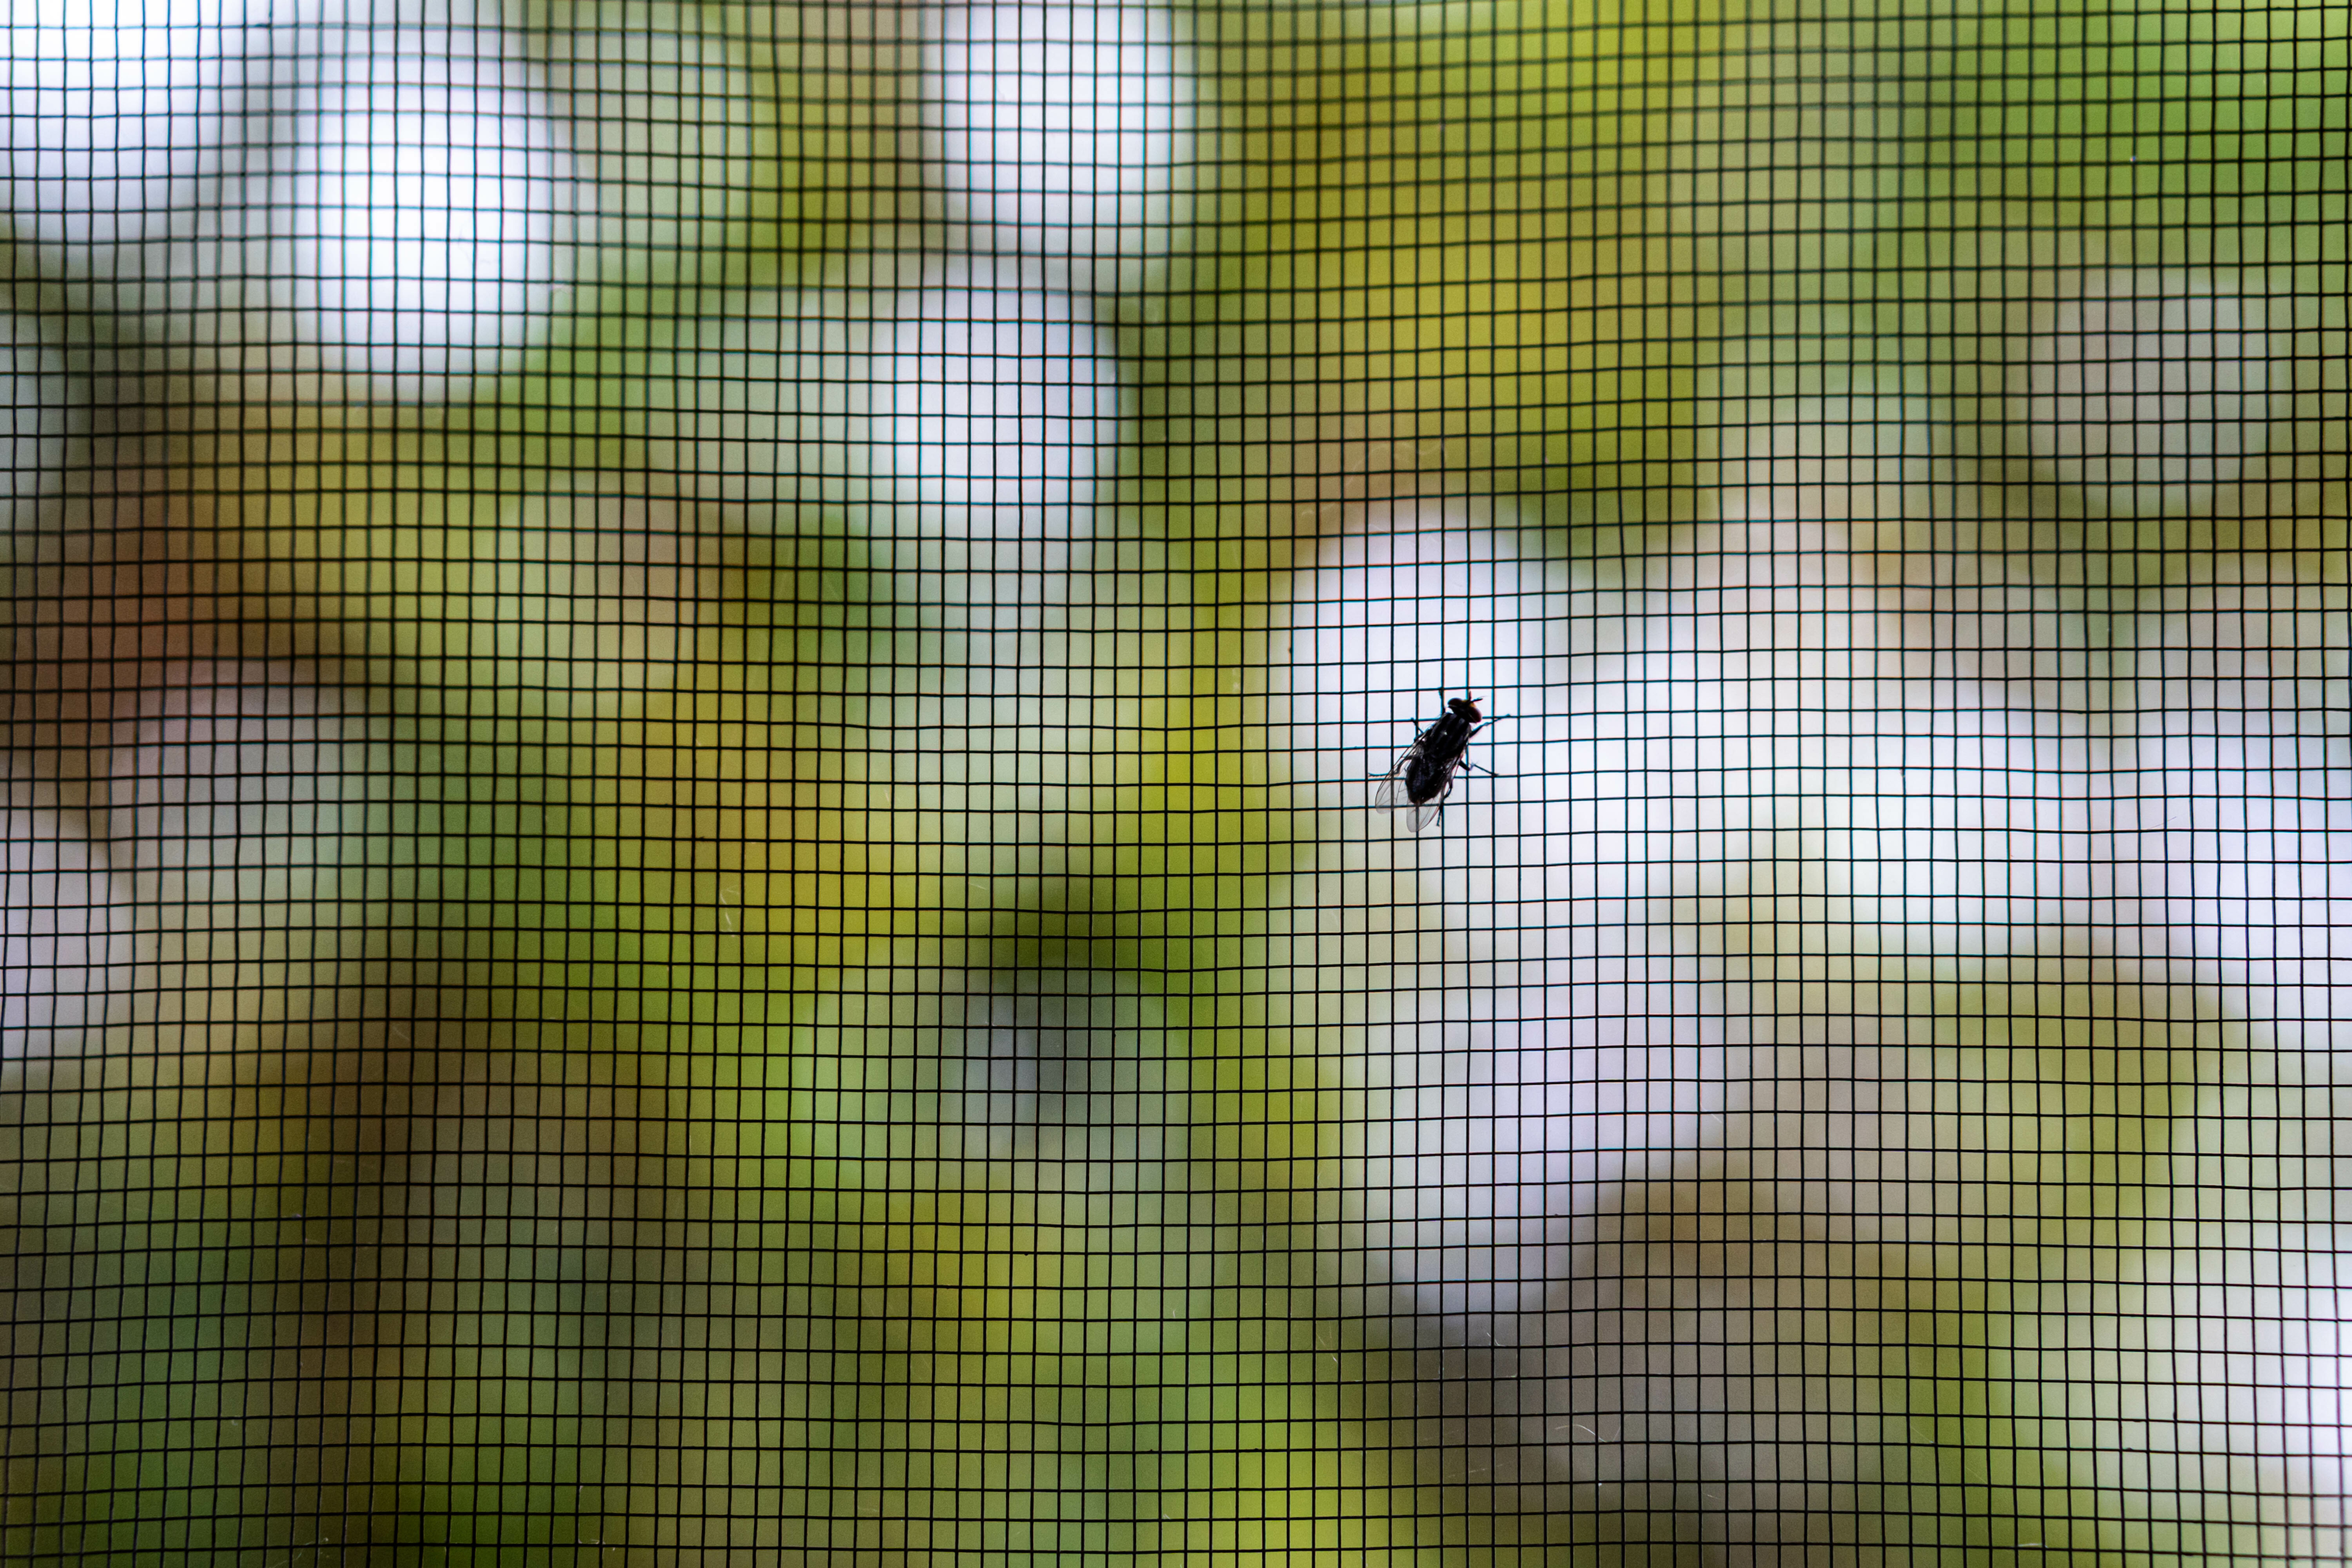 Closeup of a Fly on a Mesh Fly Screen